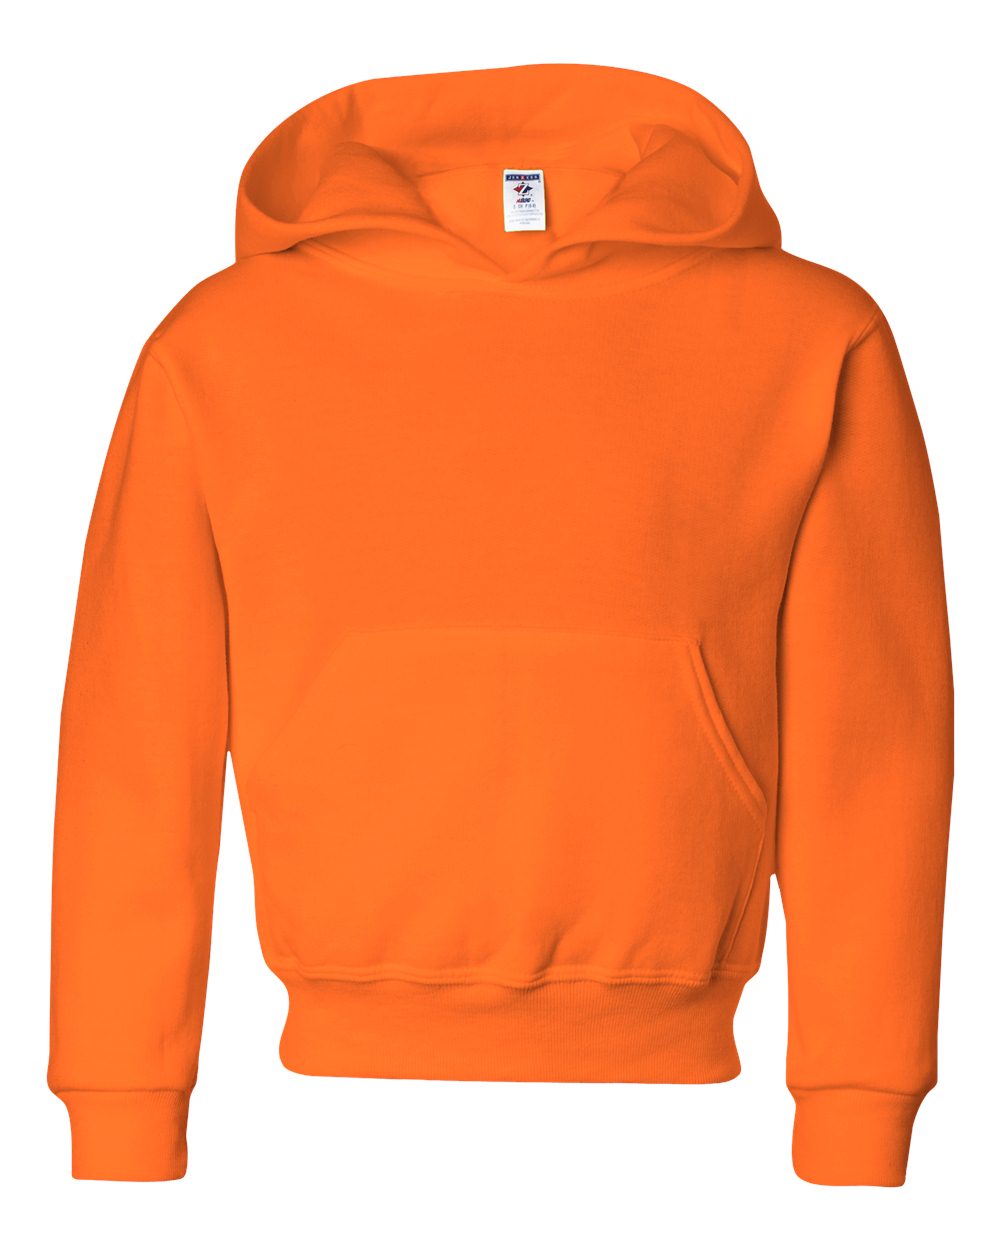 Jerzees Youth Hoodie (996YR) in Safety Orange